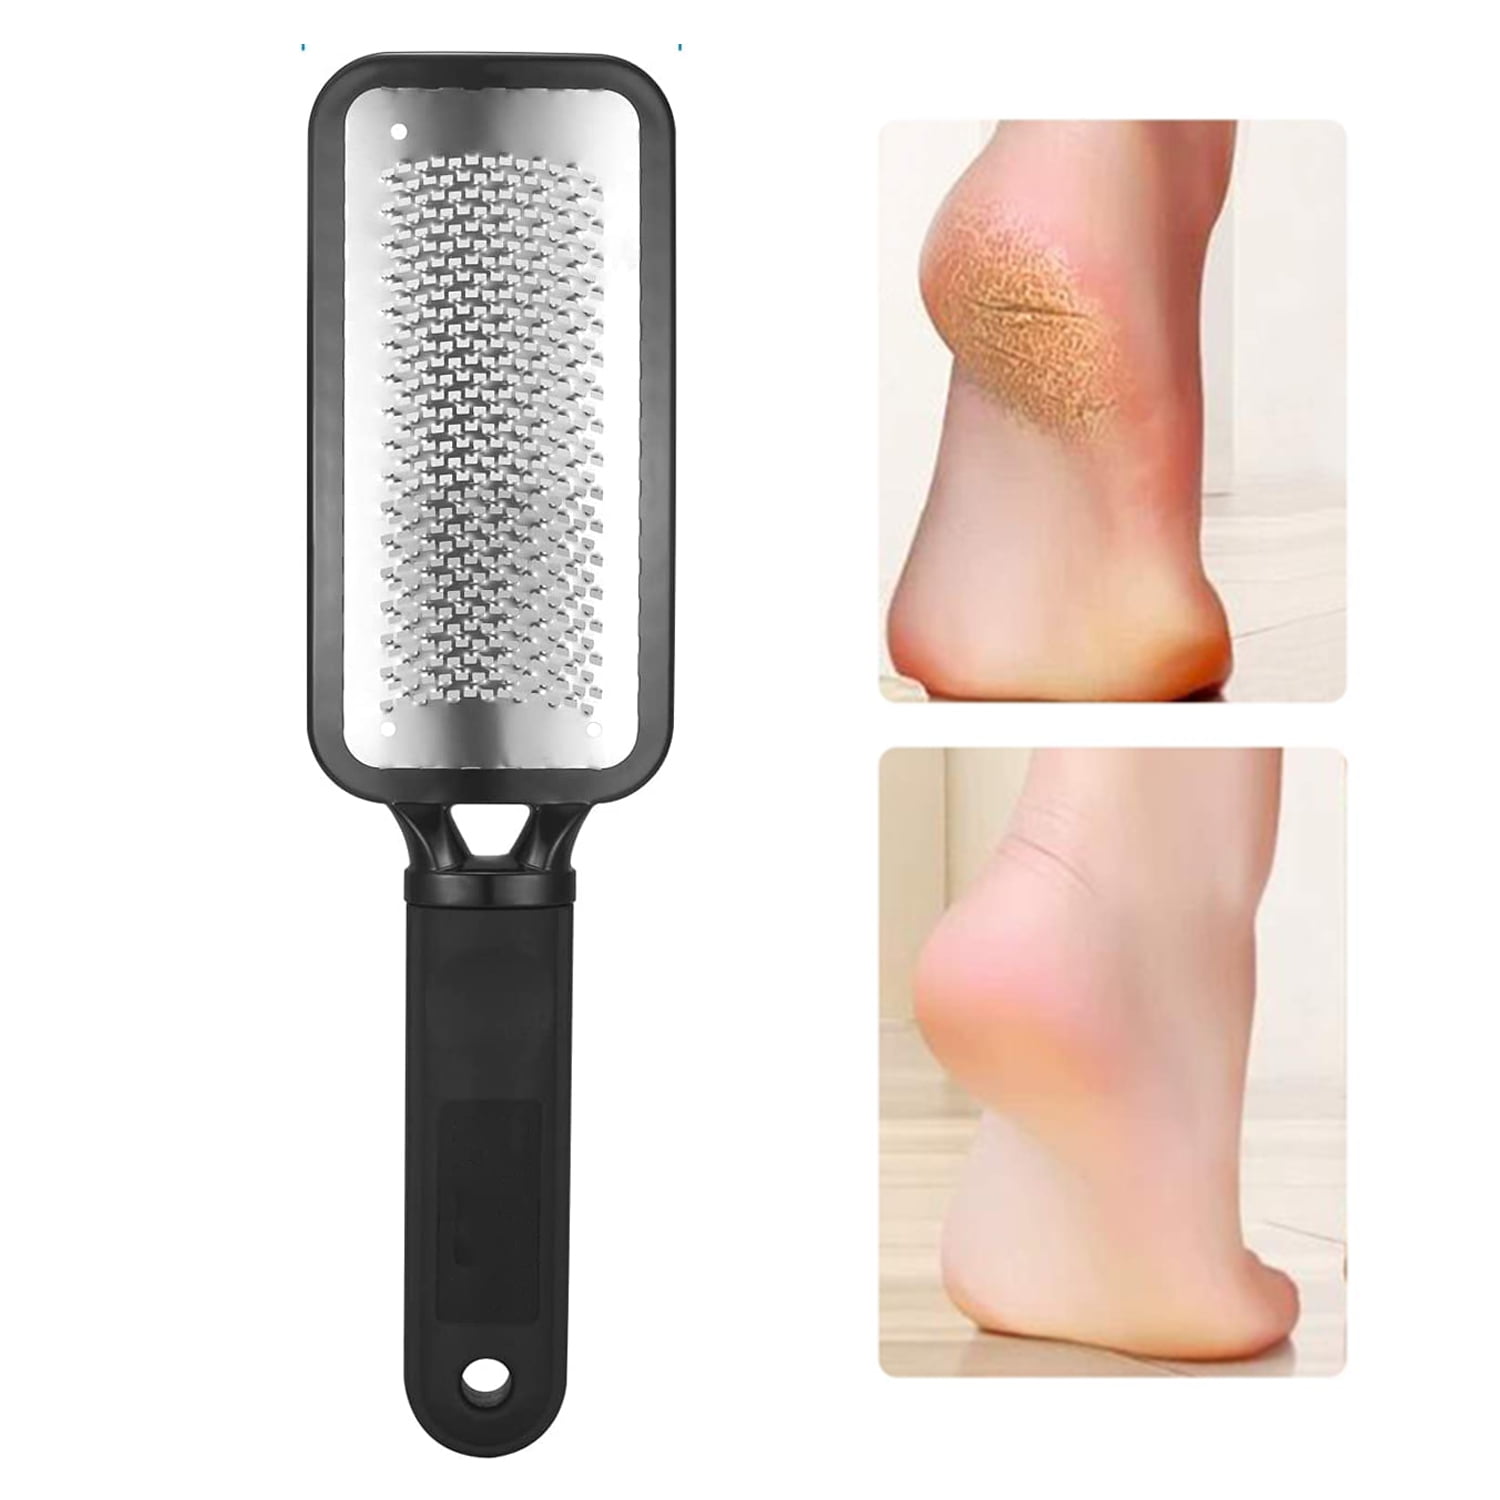 MEGAFILE Foot File Callus Remover for Feet (XL Size) NYK1 Foot